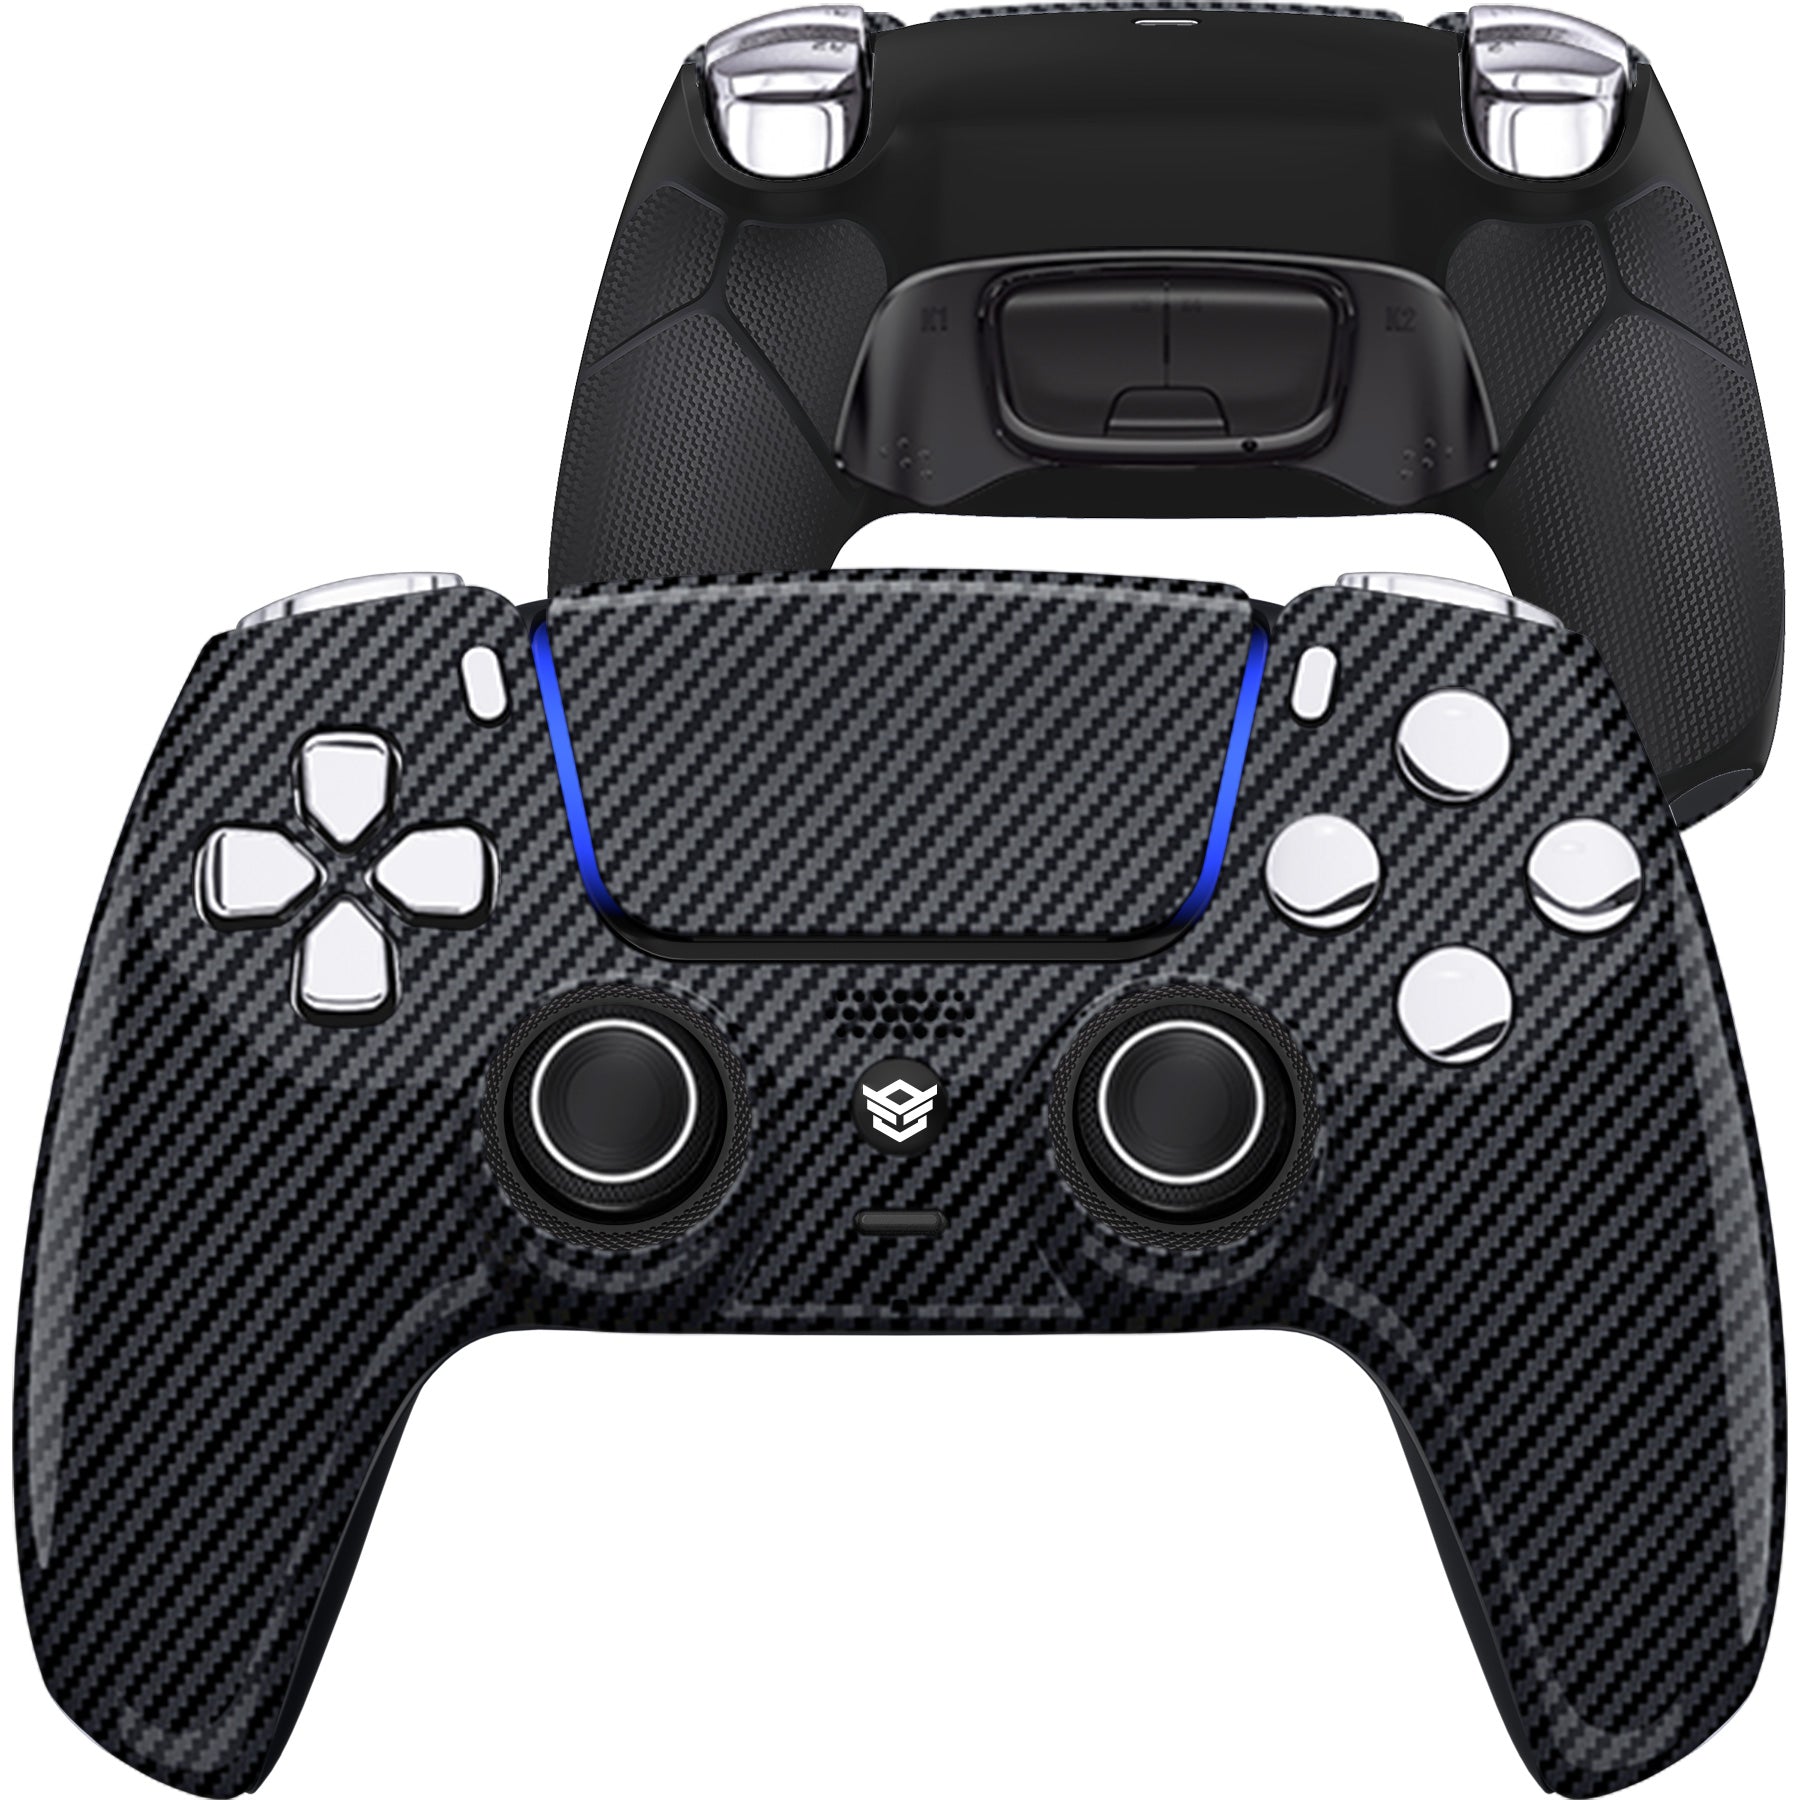  HEXGAMING HEX Esports Rival Elite Controller 2 Paddles &  Interchangeable Thumbsticks & Hair Trigger Compatible with ps5 Customized  Game Controller PC Wireless FPS Gamepad - Black : Video Games